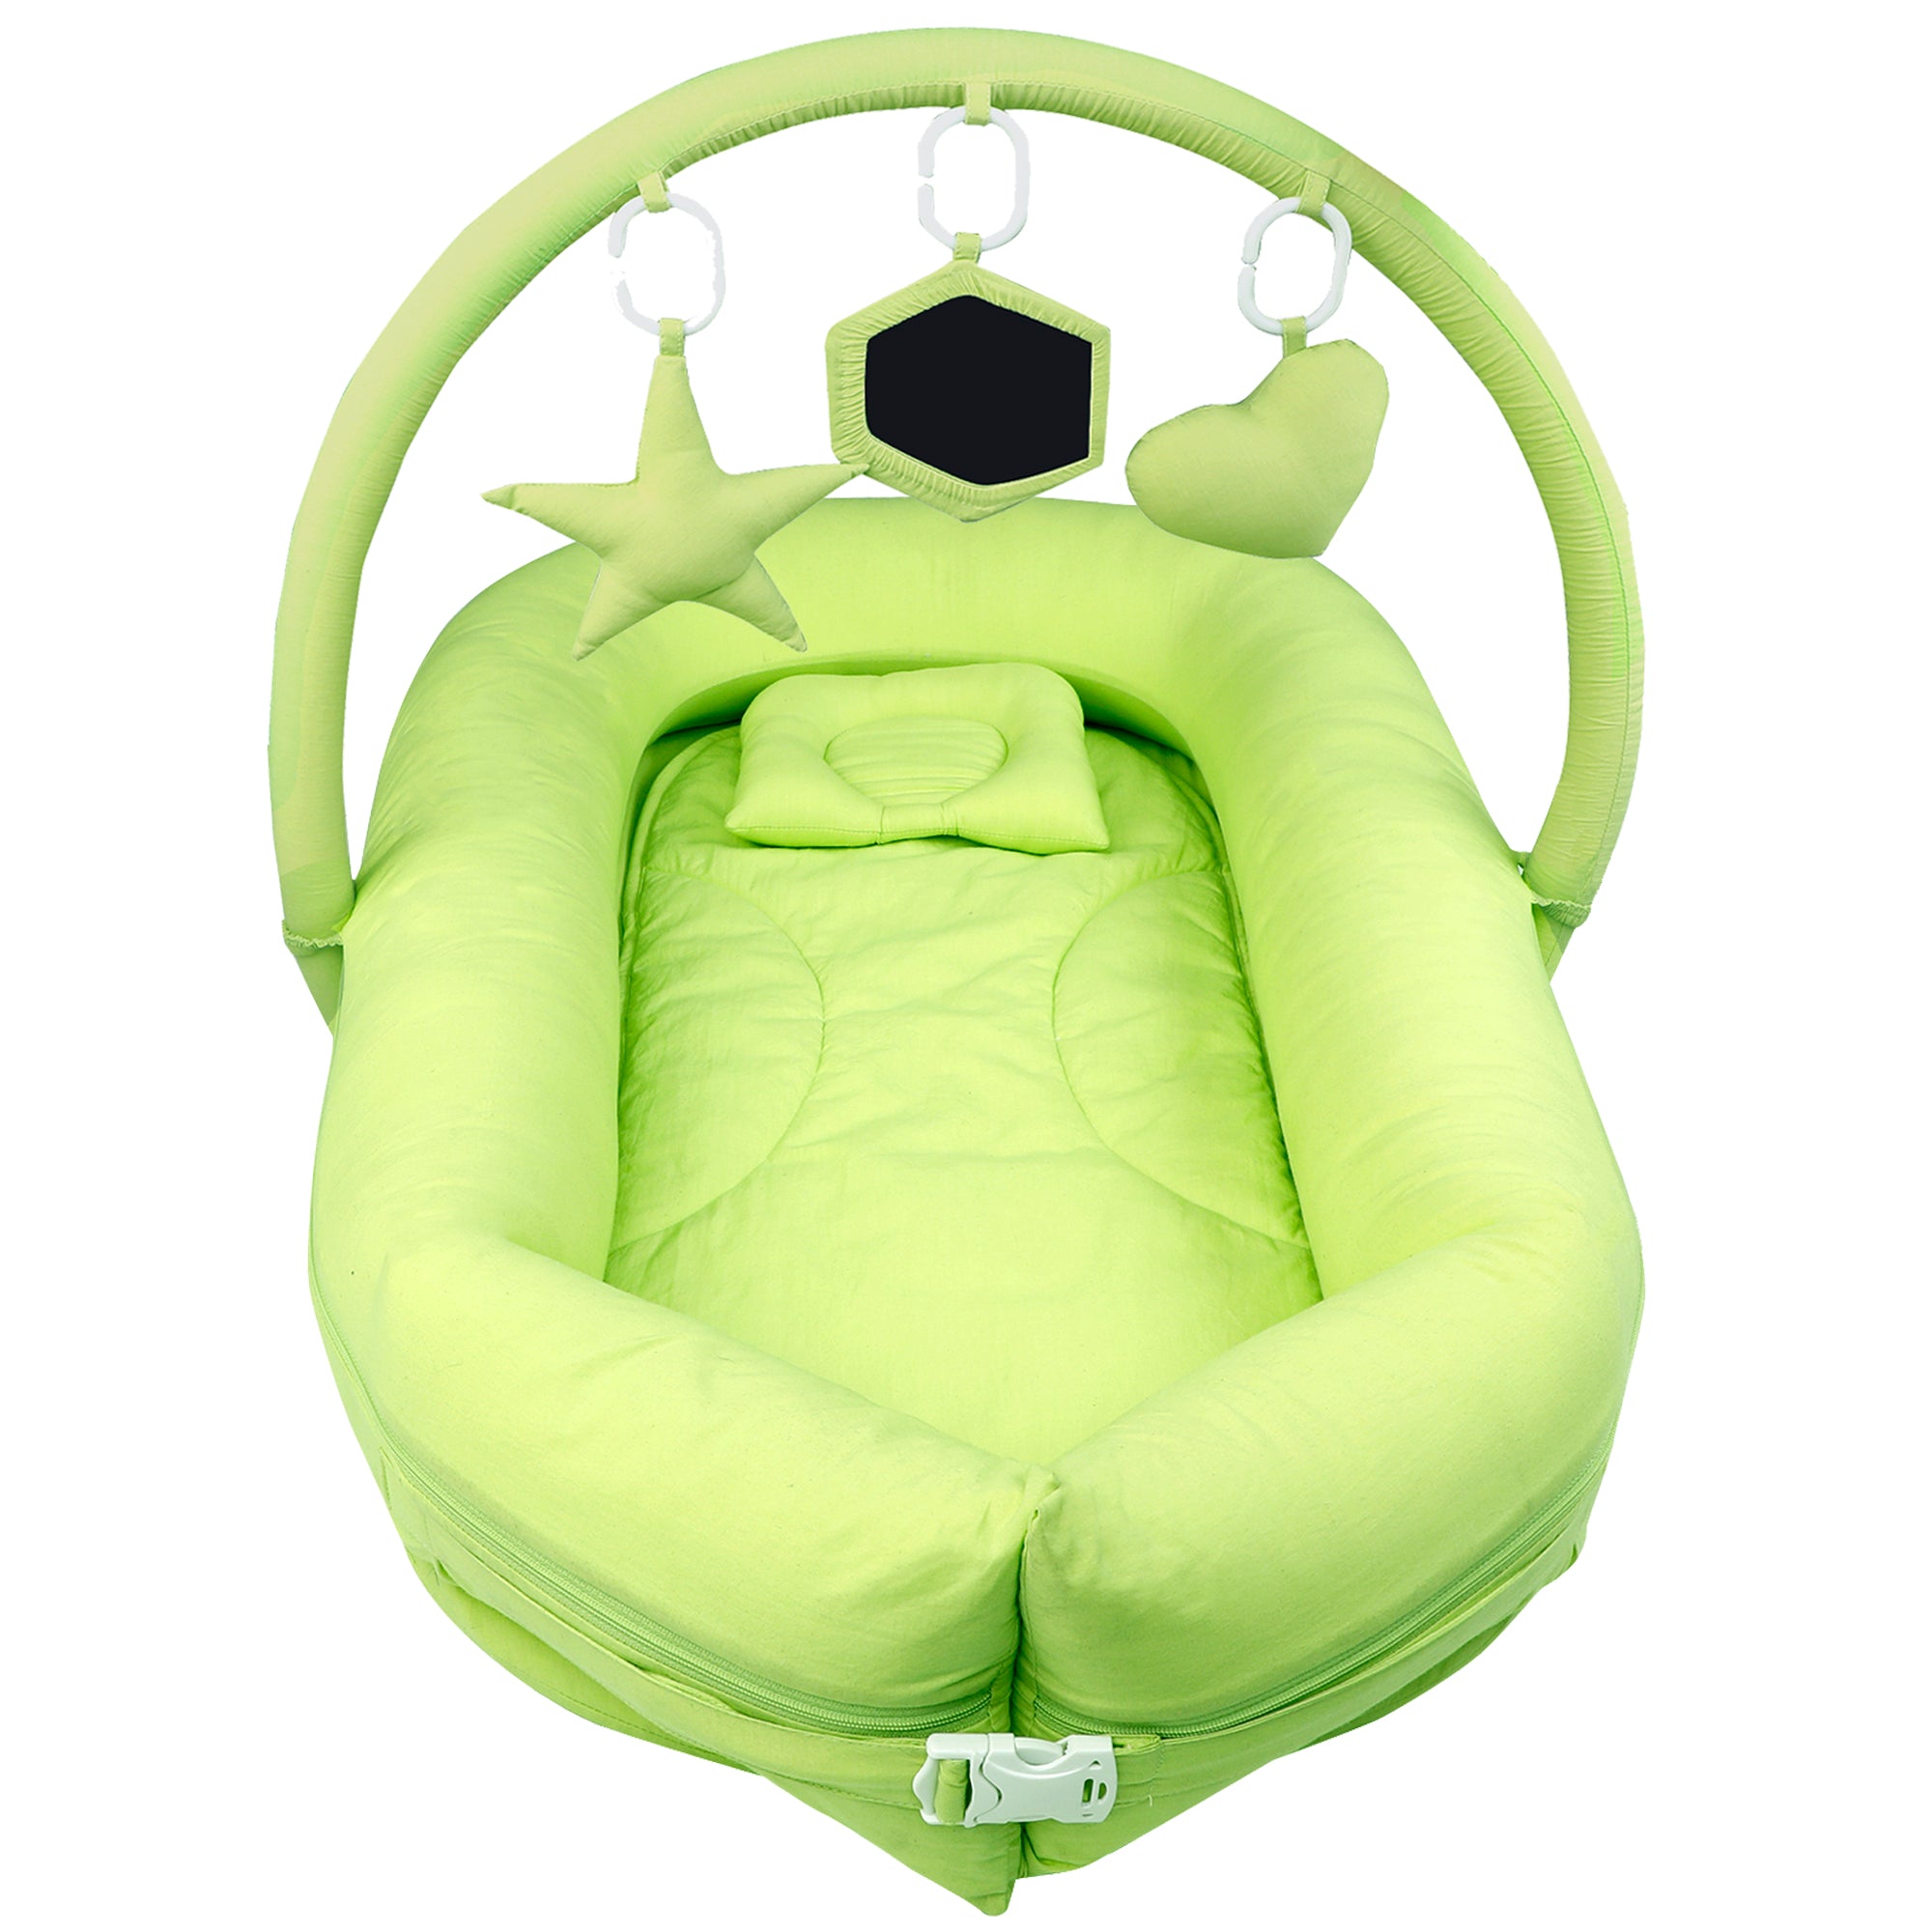 SHADOW LIME PLAY GYM ATTACHMENT FOR NESTO PAD